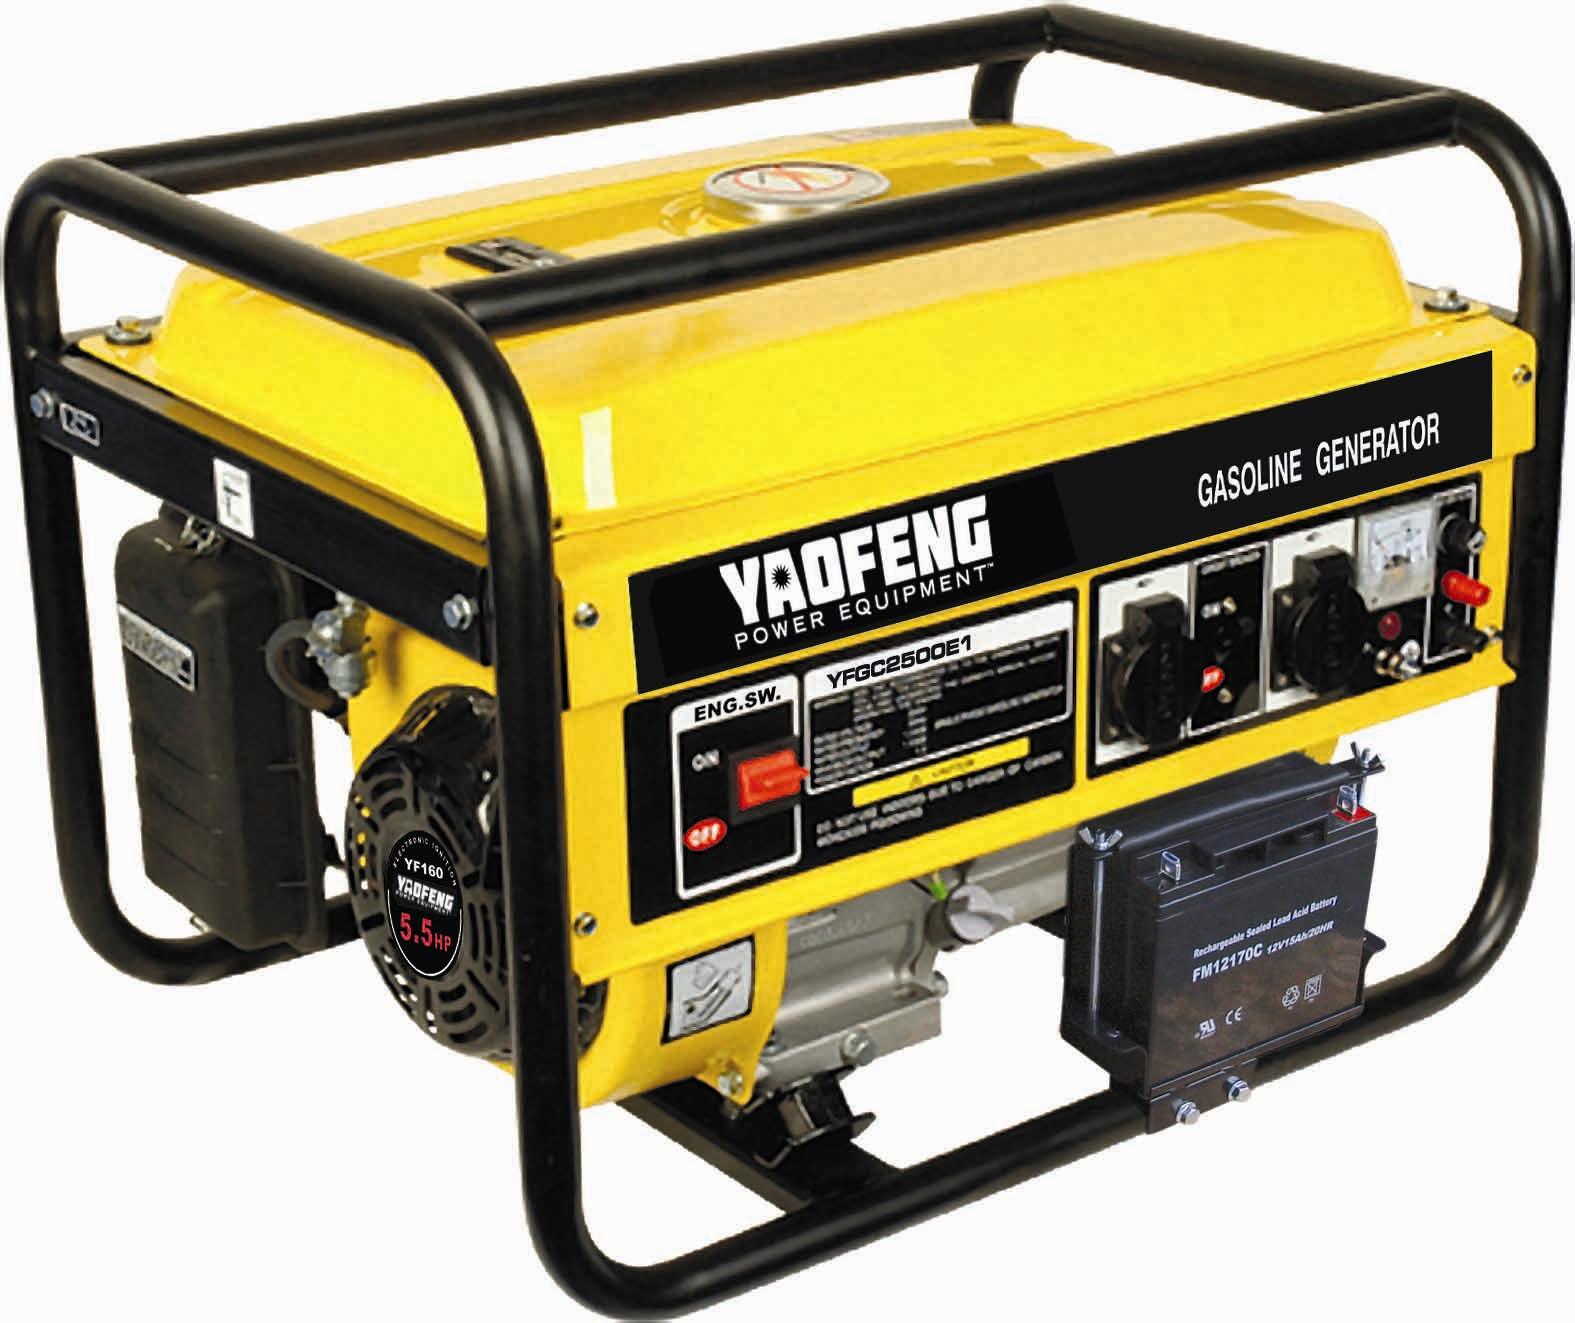 2000 Watts Portable Power Gasoline Generator with EPA, Carb, CE, Soncap Certificate (YFGC2500E1)